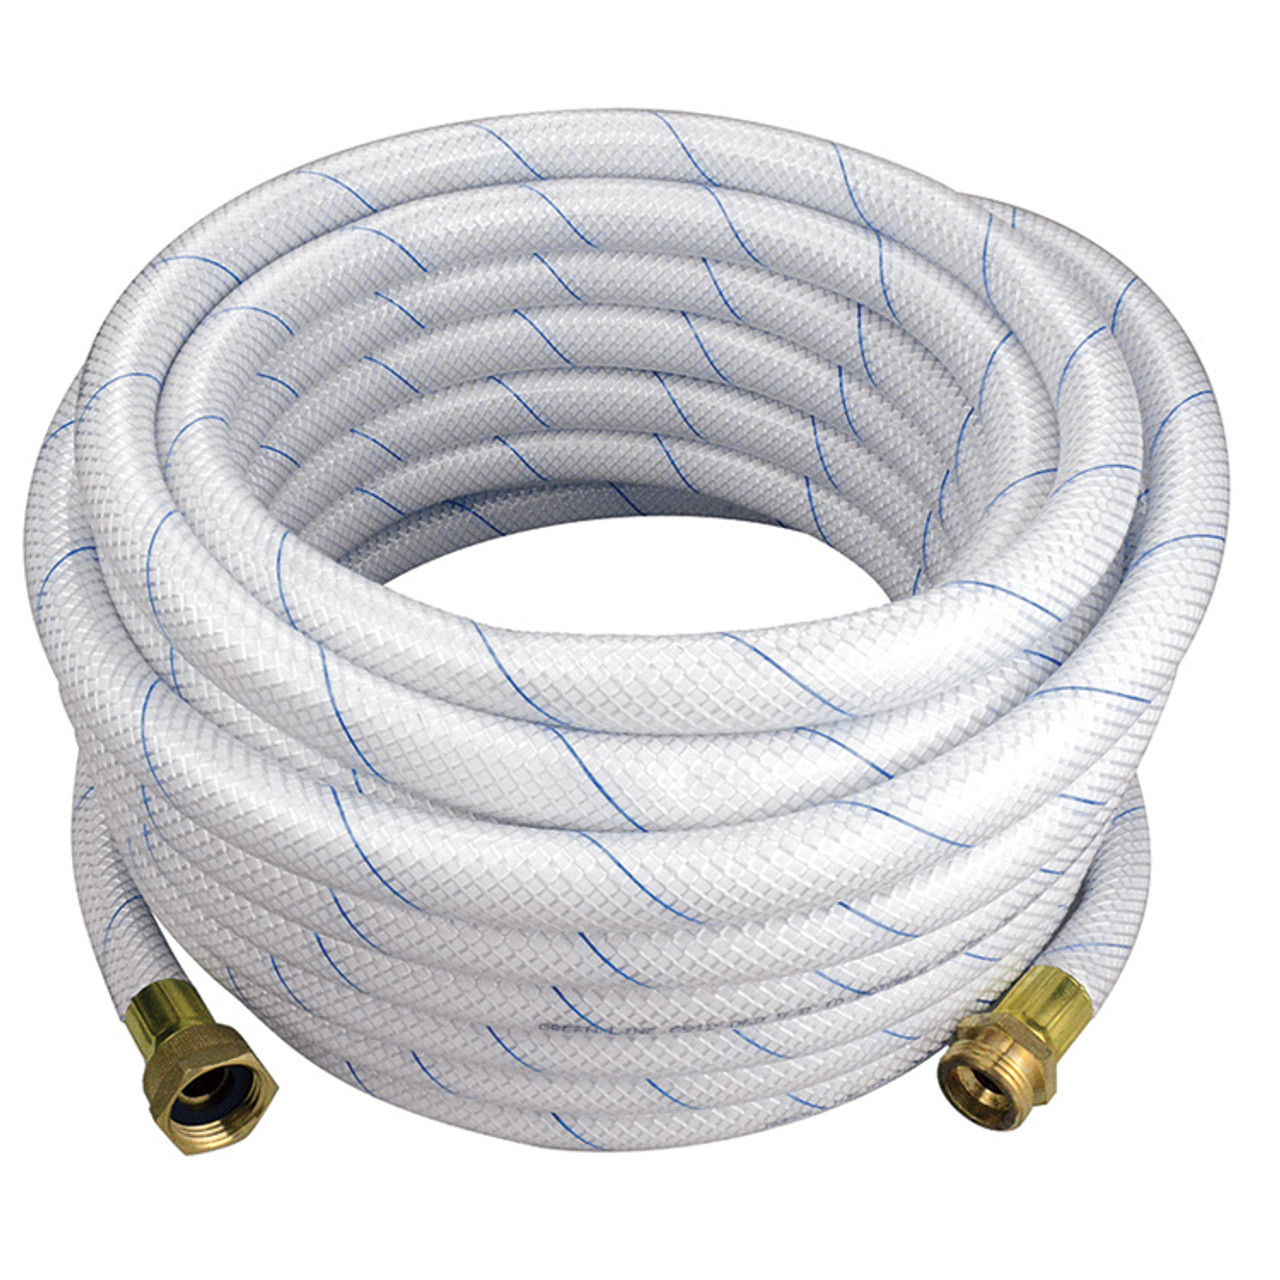 5/8" x 50' Potable Water Hose Assembly   G912-063GHT50